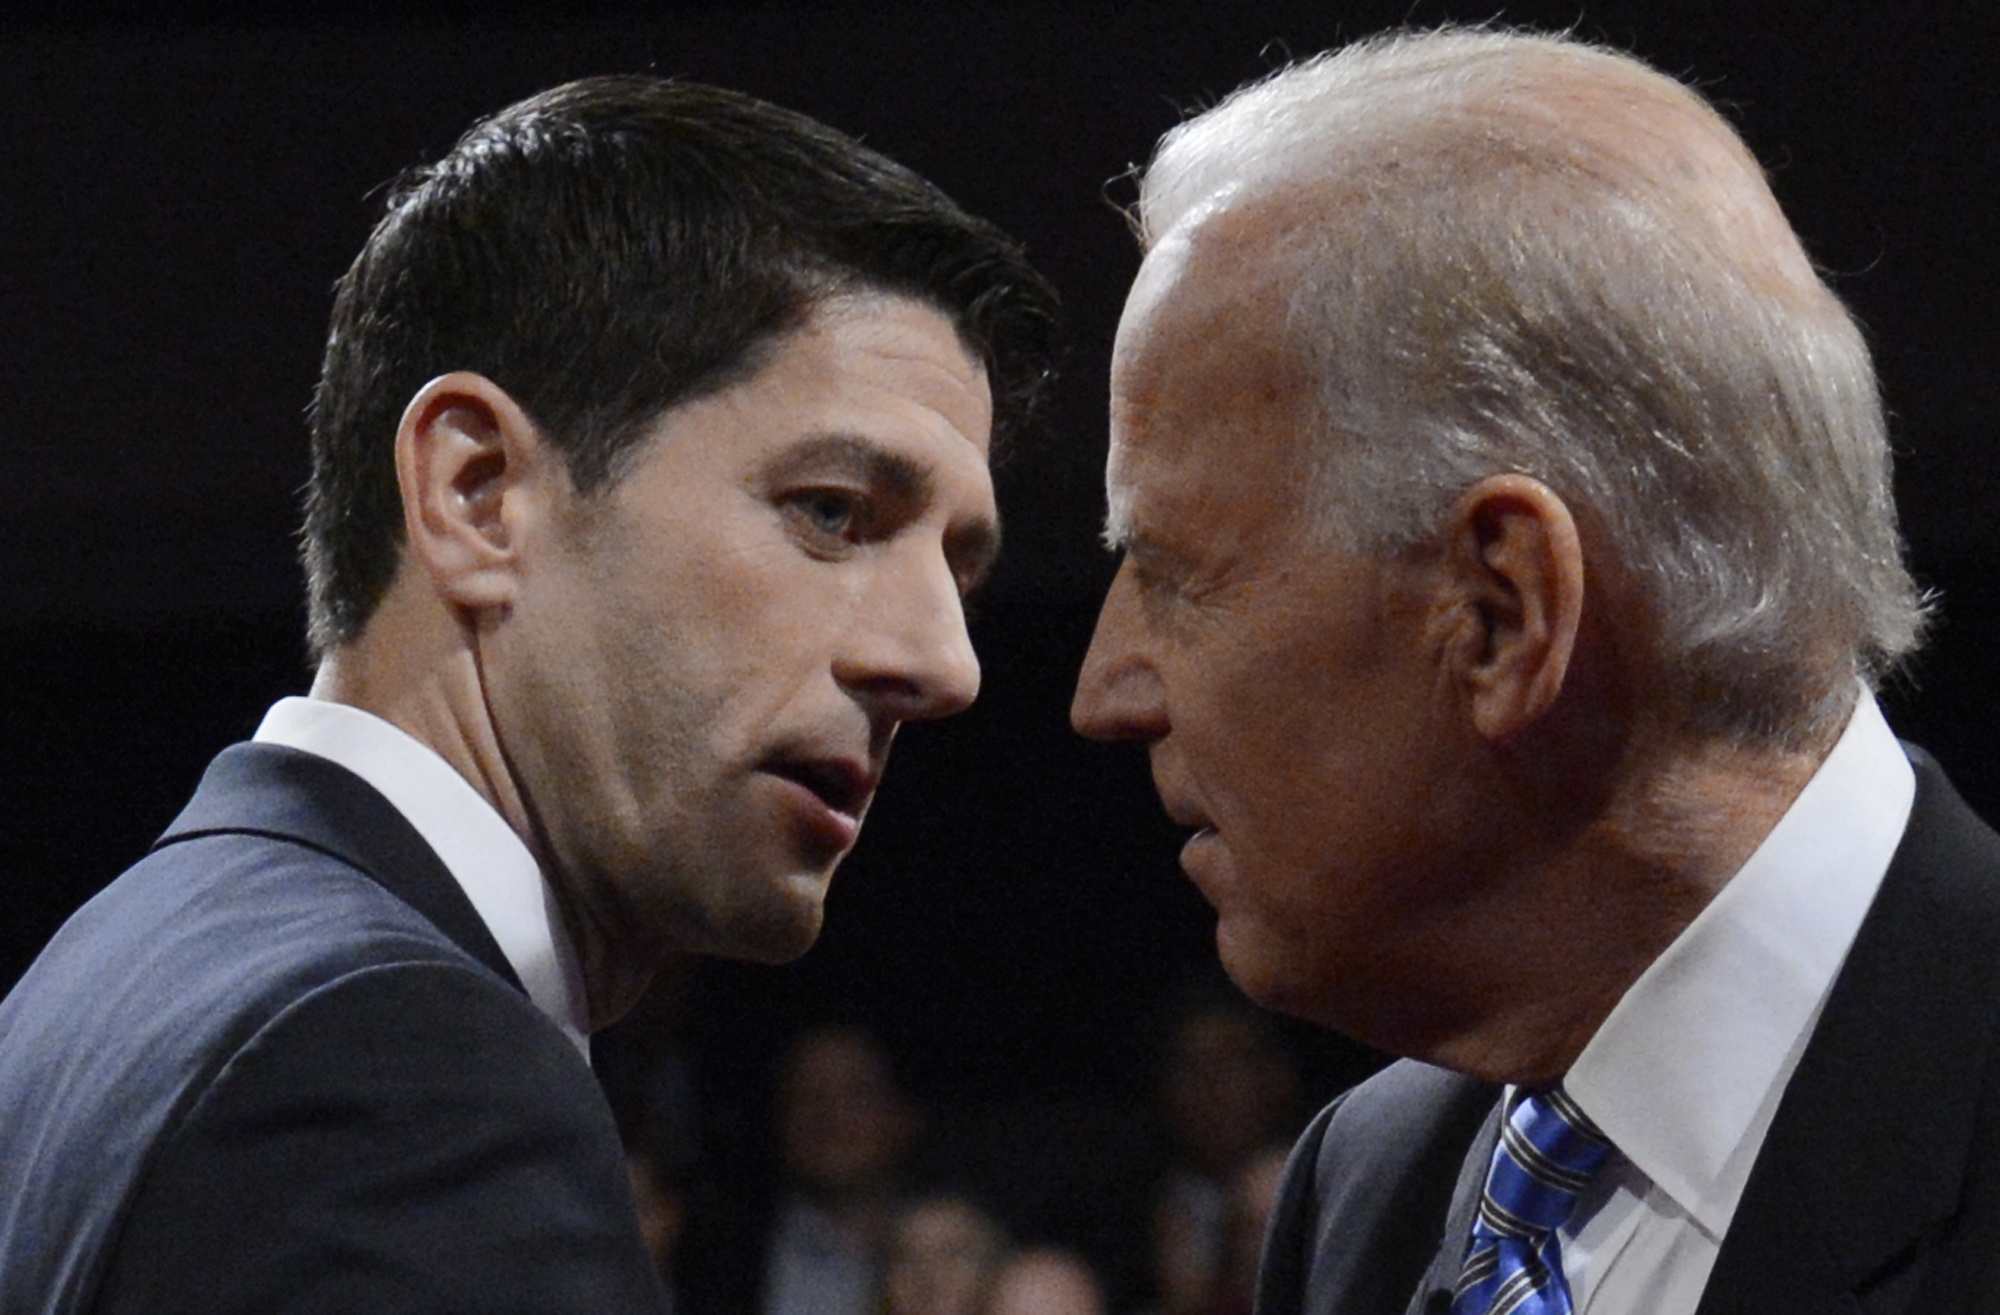 Vice President Joe Biden and Republican vice presidential nominee Paul Ryan shake hands after the vice presidential debate at Centre College, Thursday, in Danville, Ky.